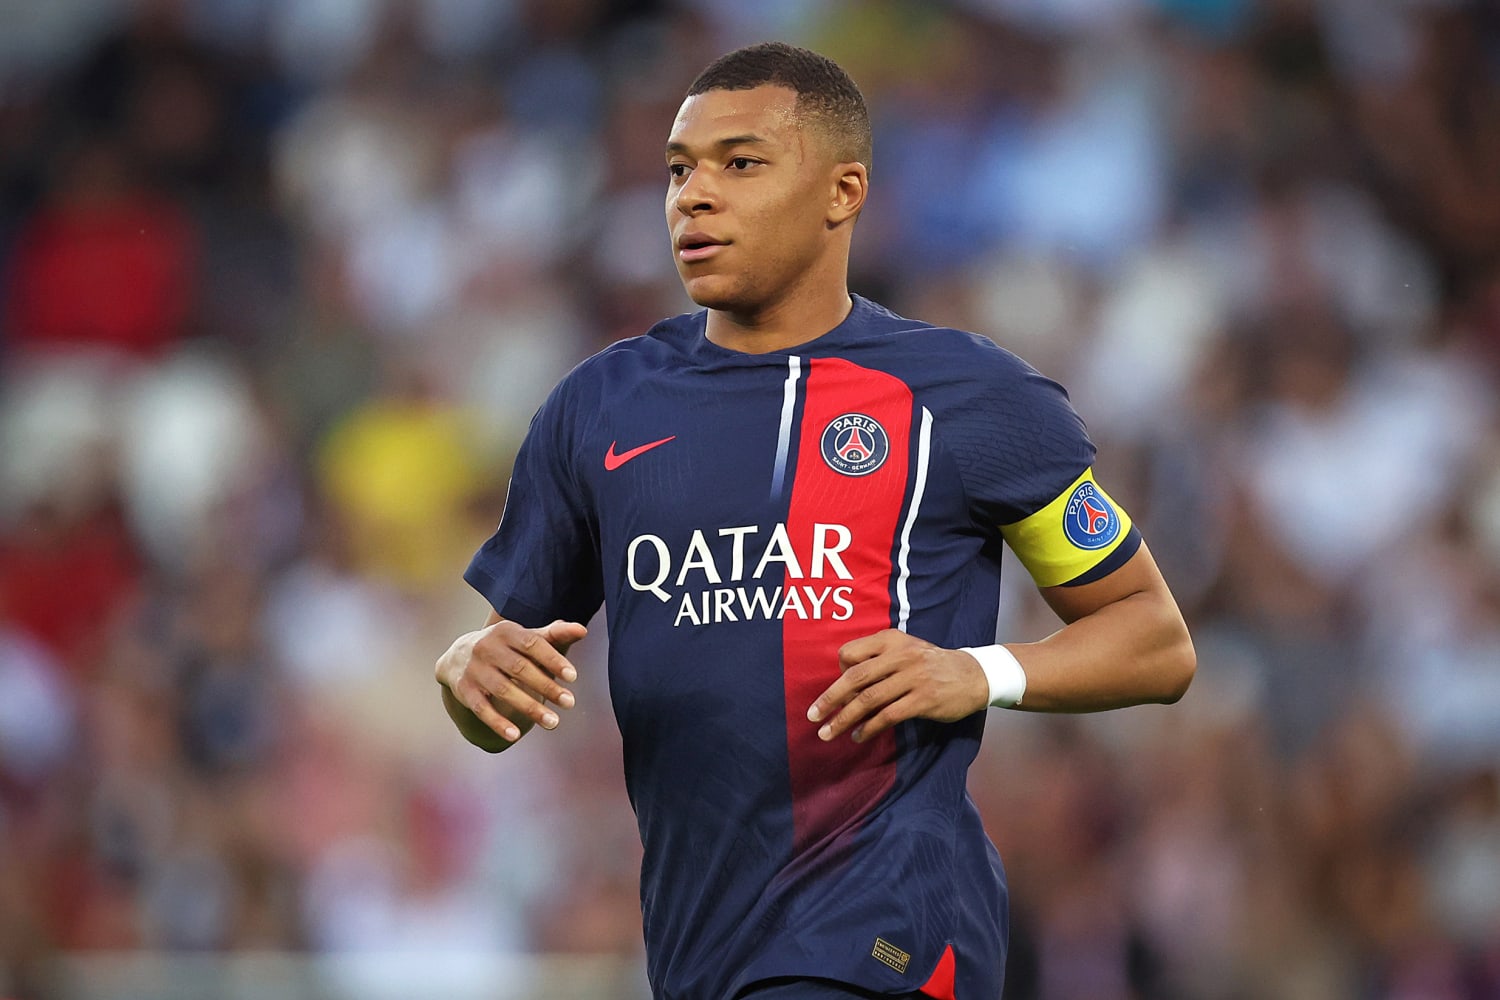 Kylian Mbappe's team gets $330 million offer from Saudi Arabia club for the French soccer star